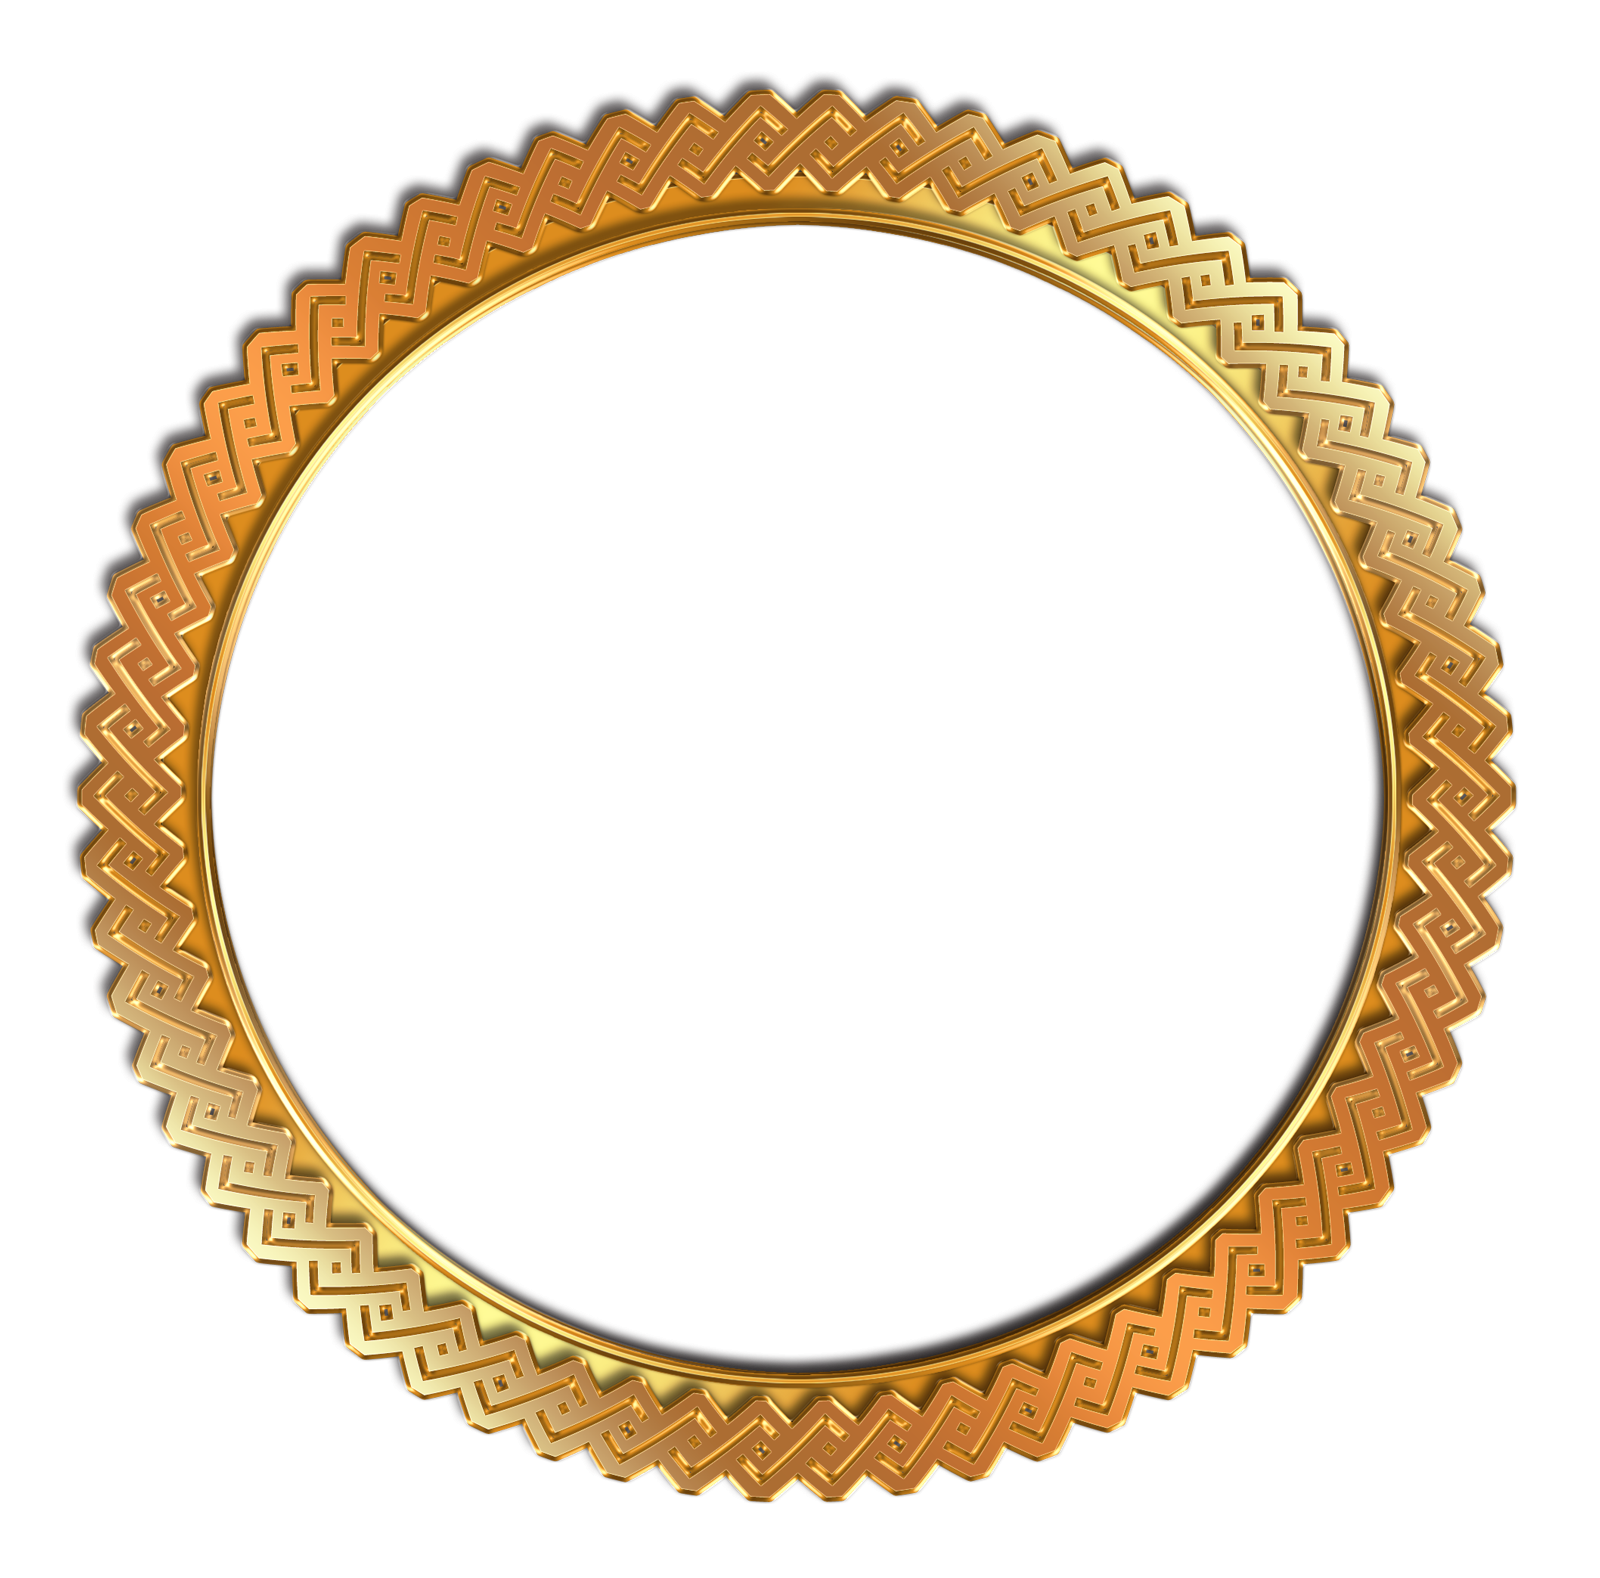 0 Result Images of Circulos Dorados Png - PNG Image Collection